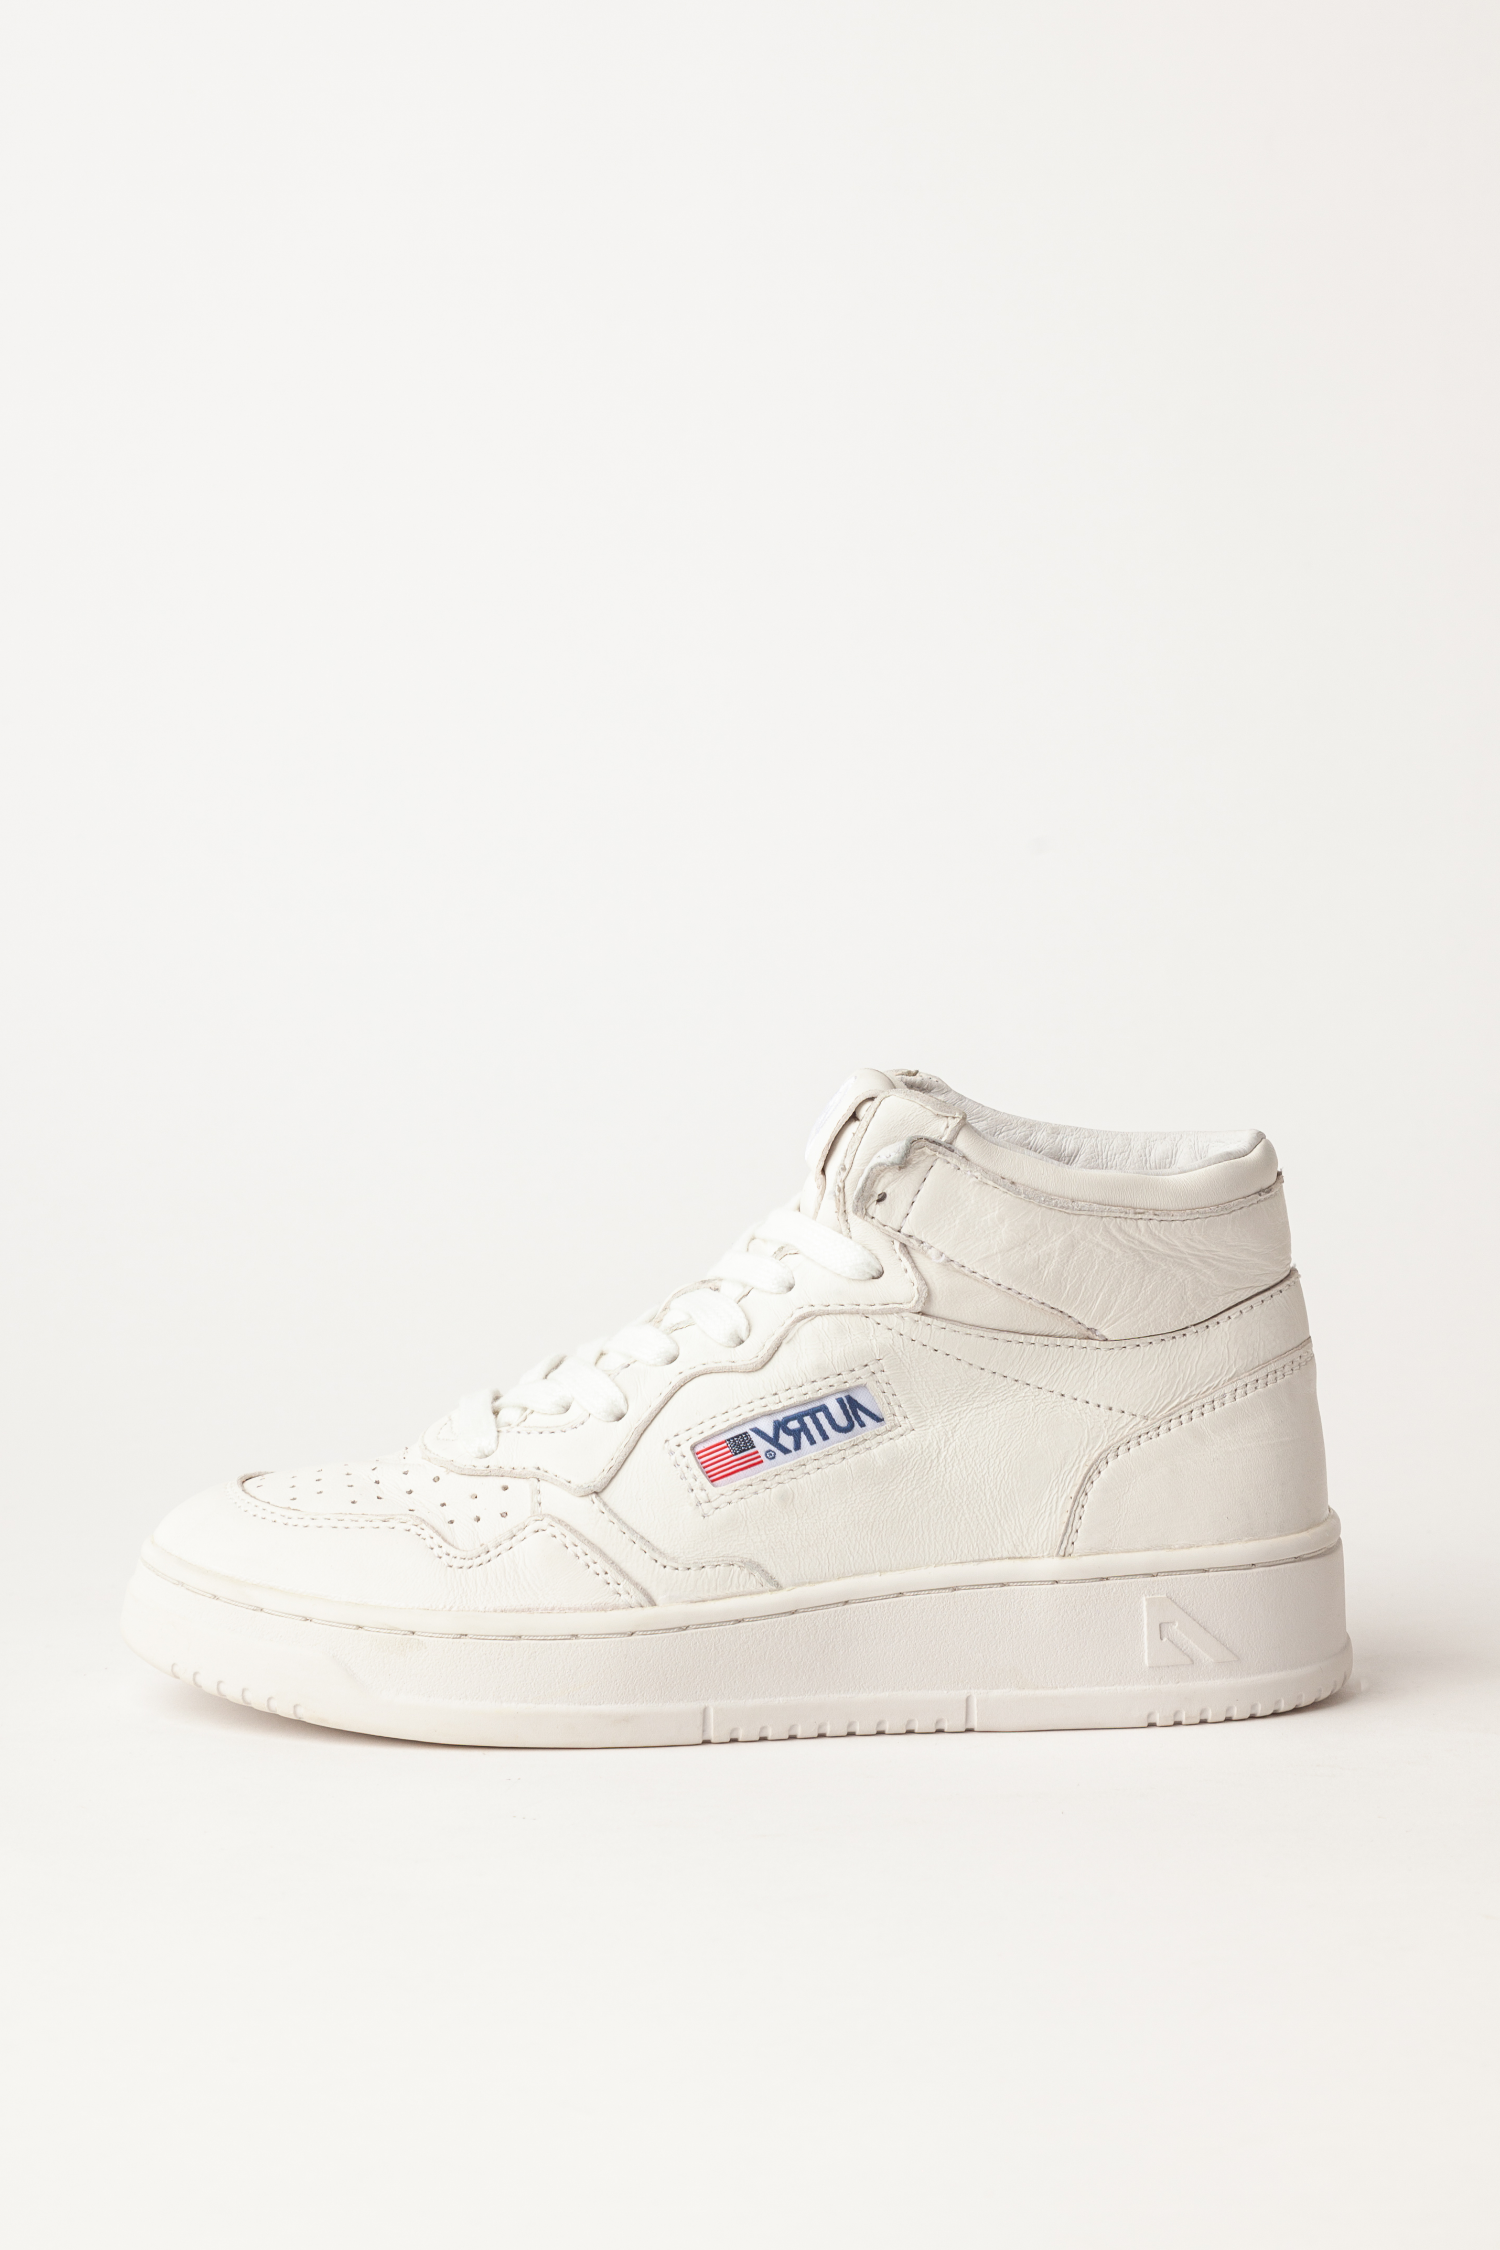 AUMM-SG10 - MEDALIST MID SNEAKERS IN SOFT GOATSKIN COLOR WHITE